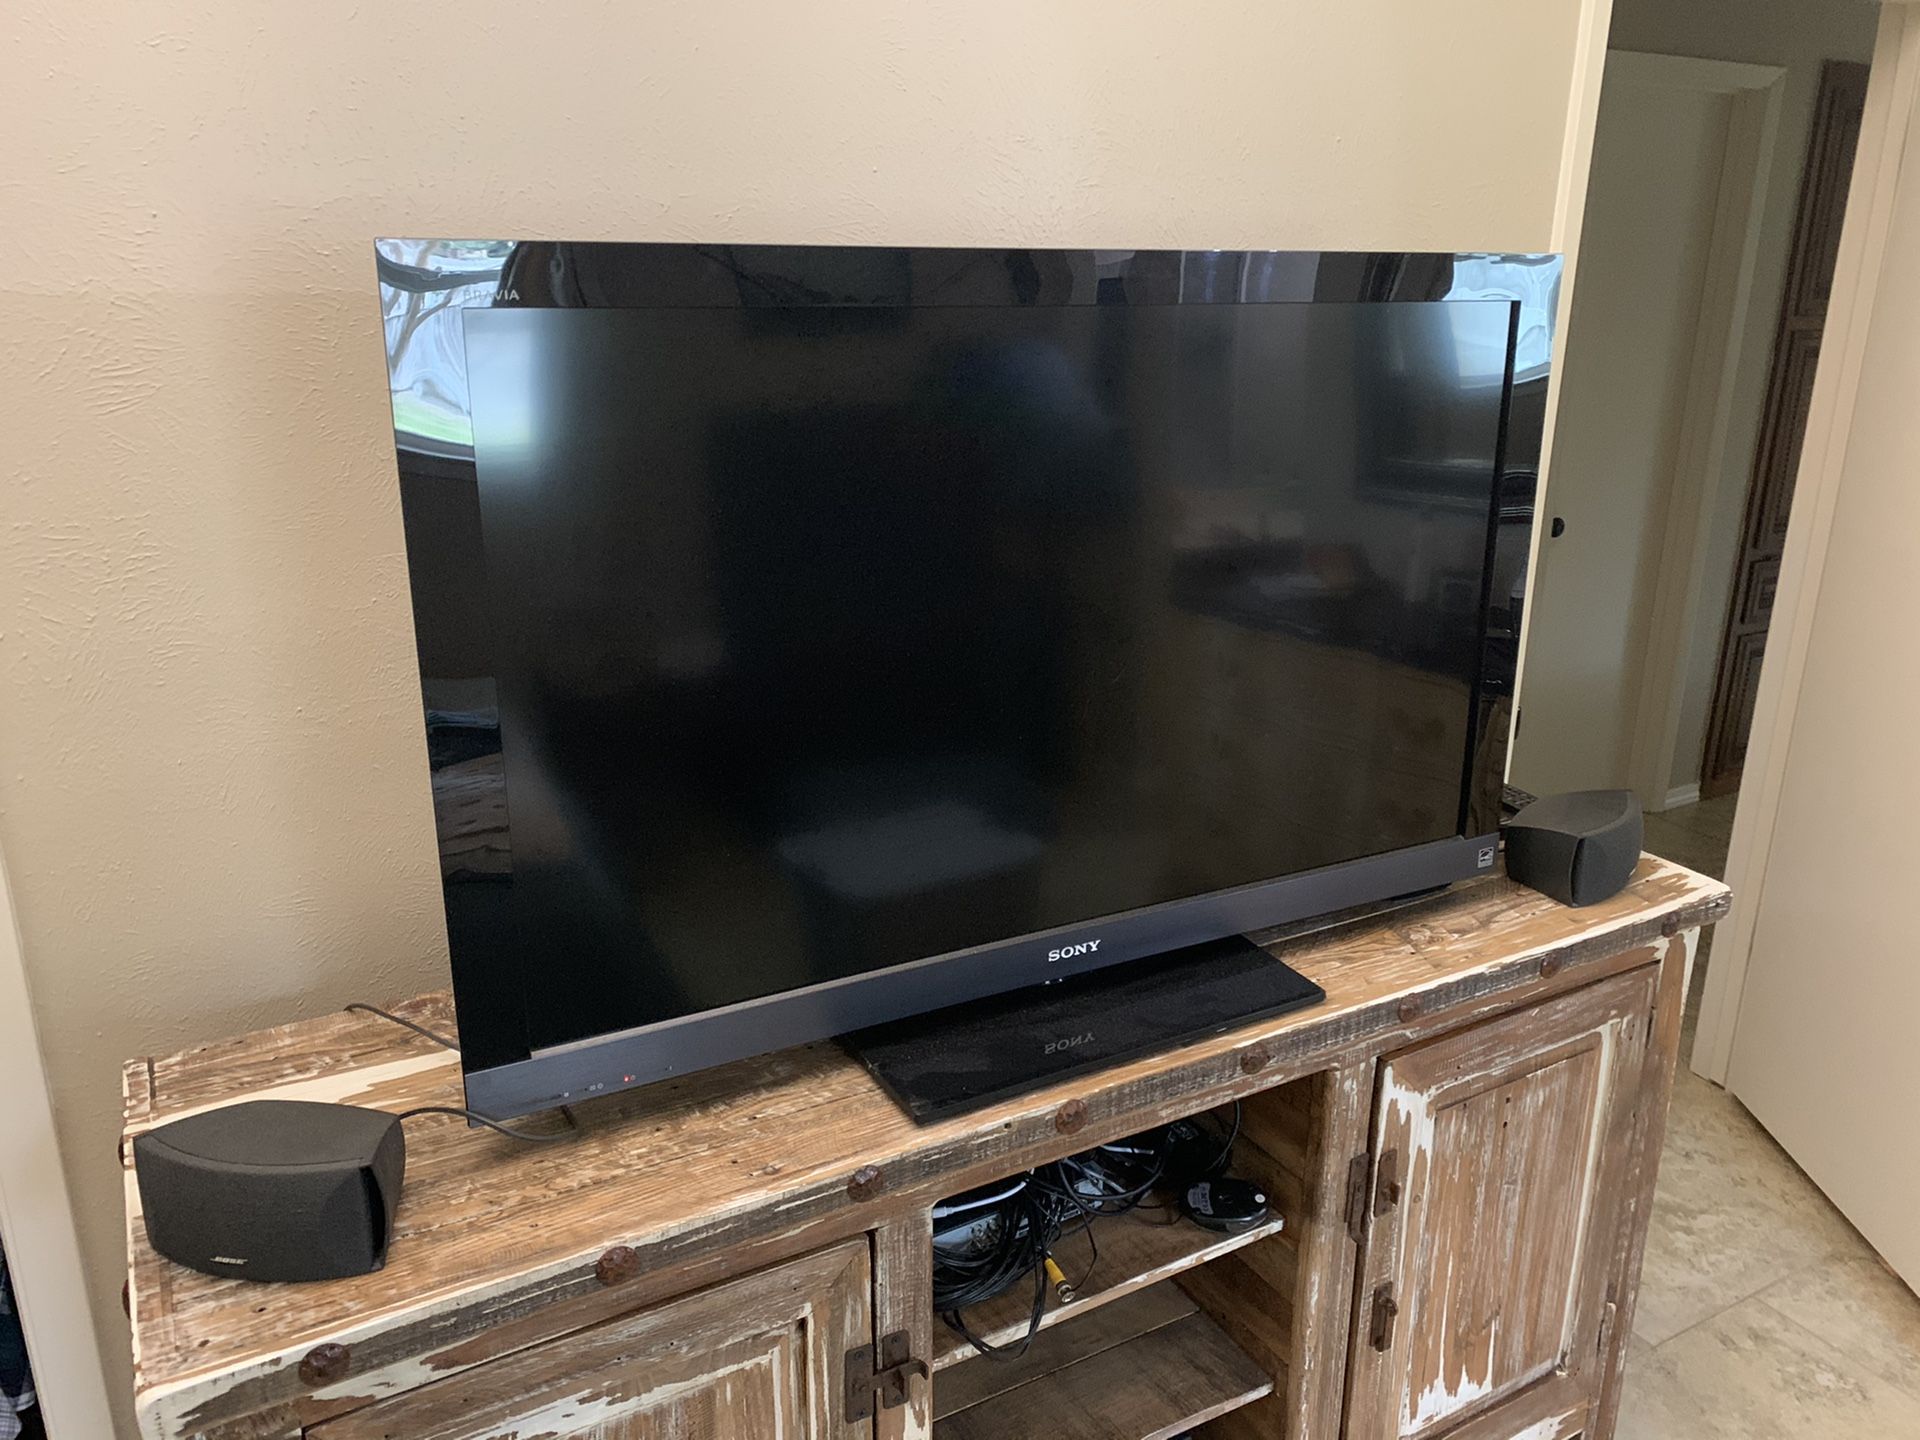 50 in Sony TV with Bose sound system